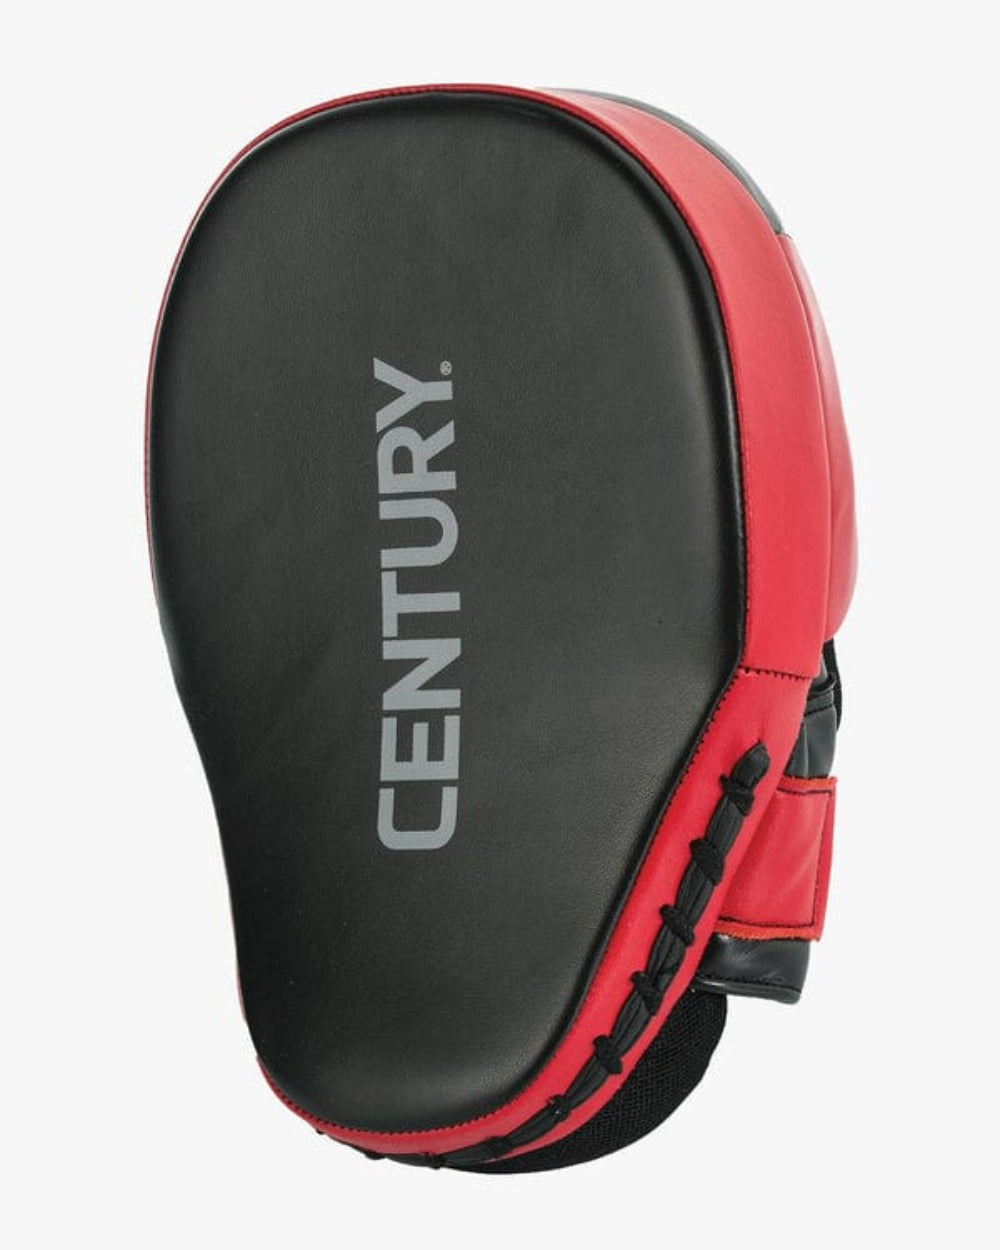 Century sporting goods Century DRIVE CURVED PUNCH MITTS boxing and MMA